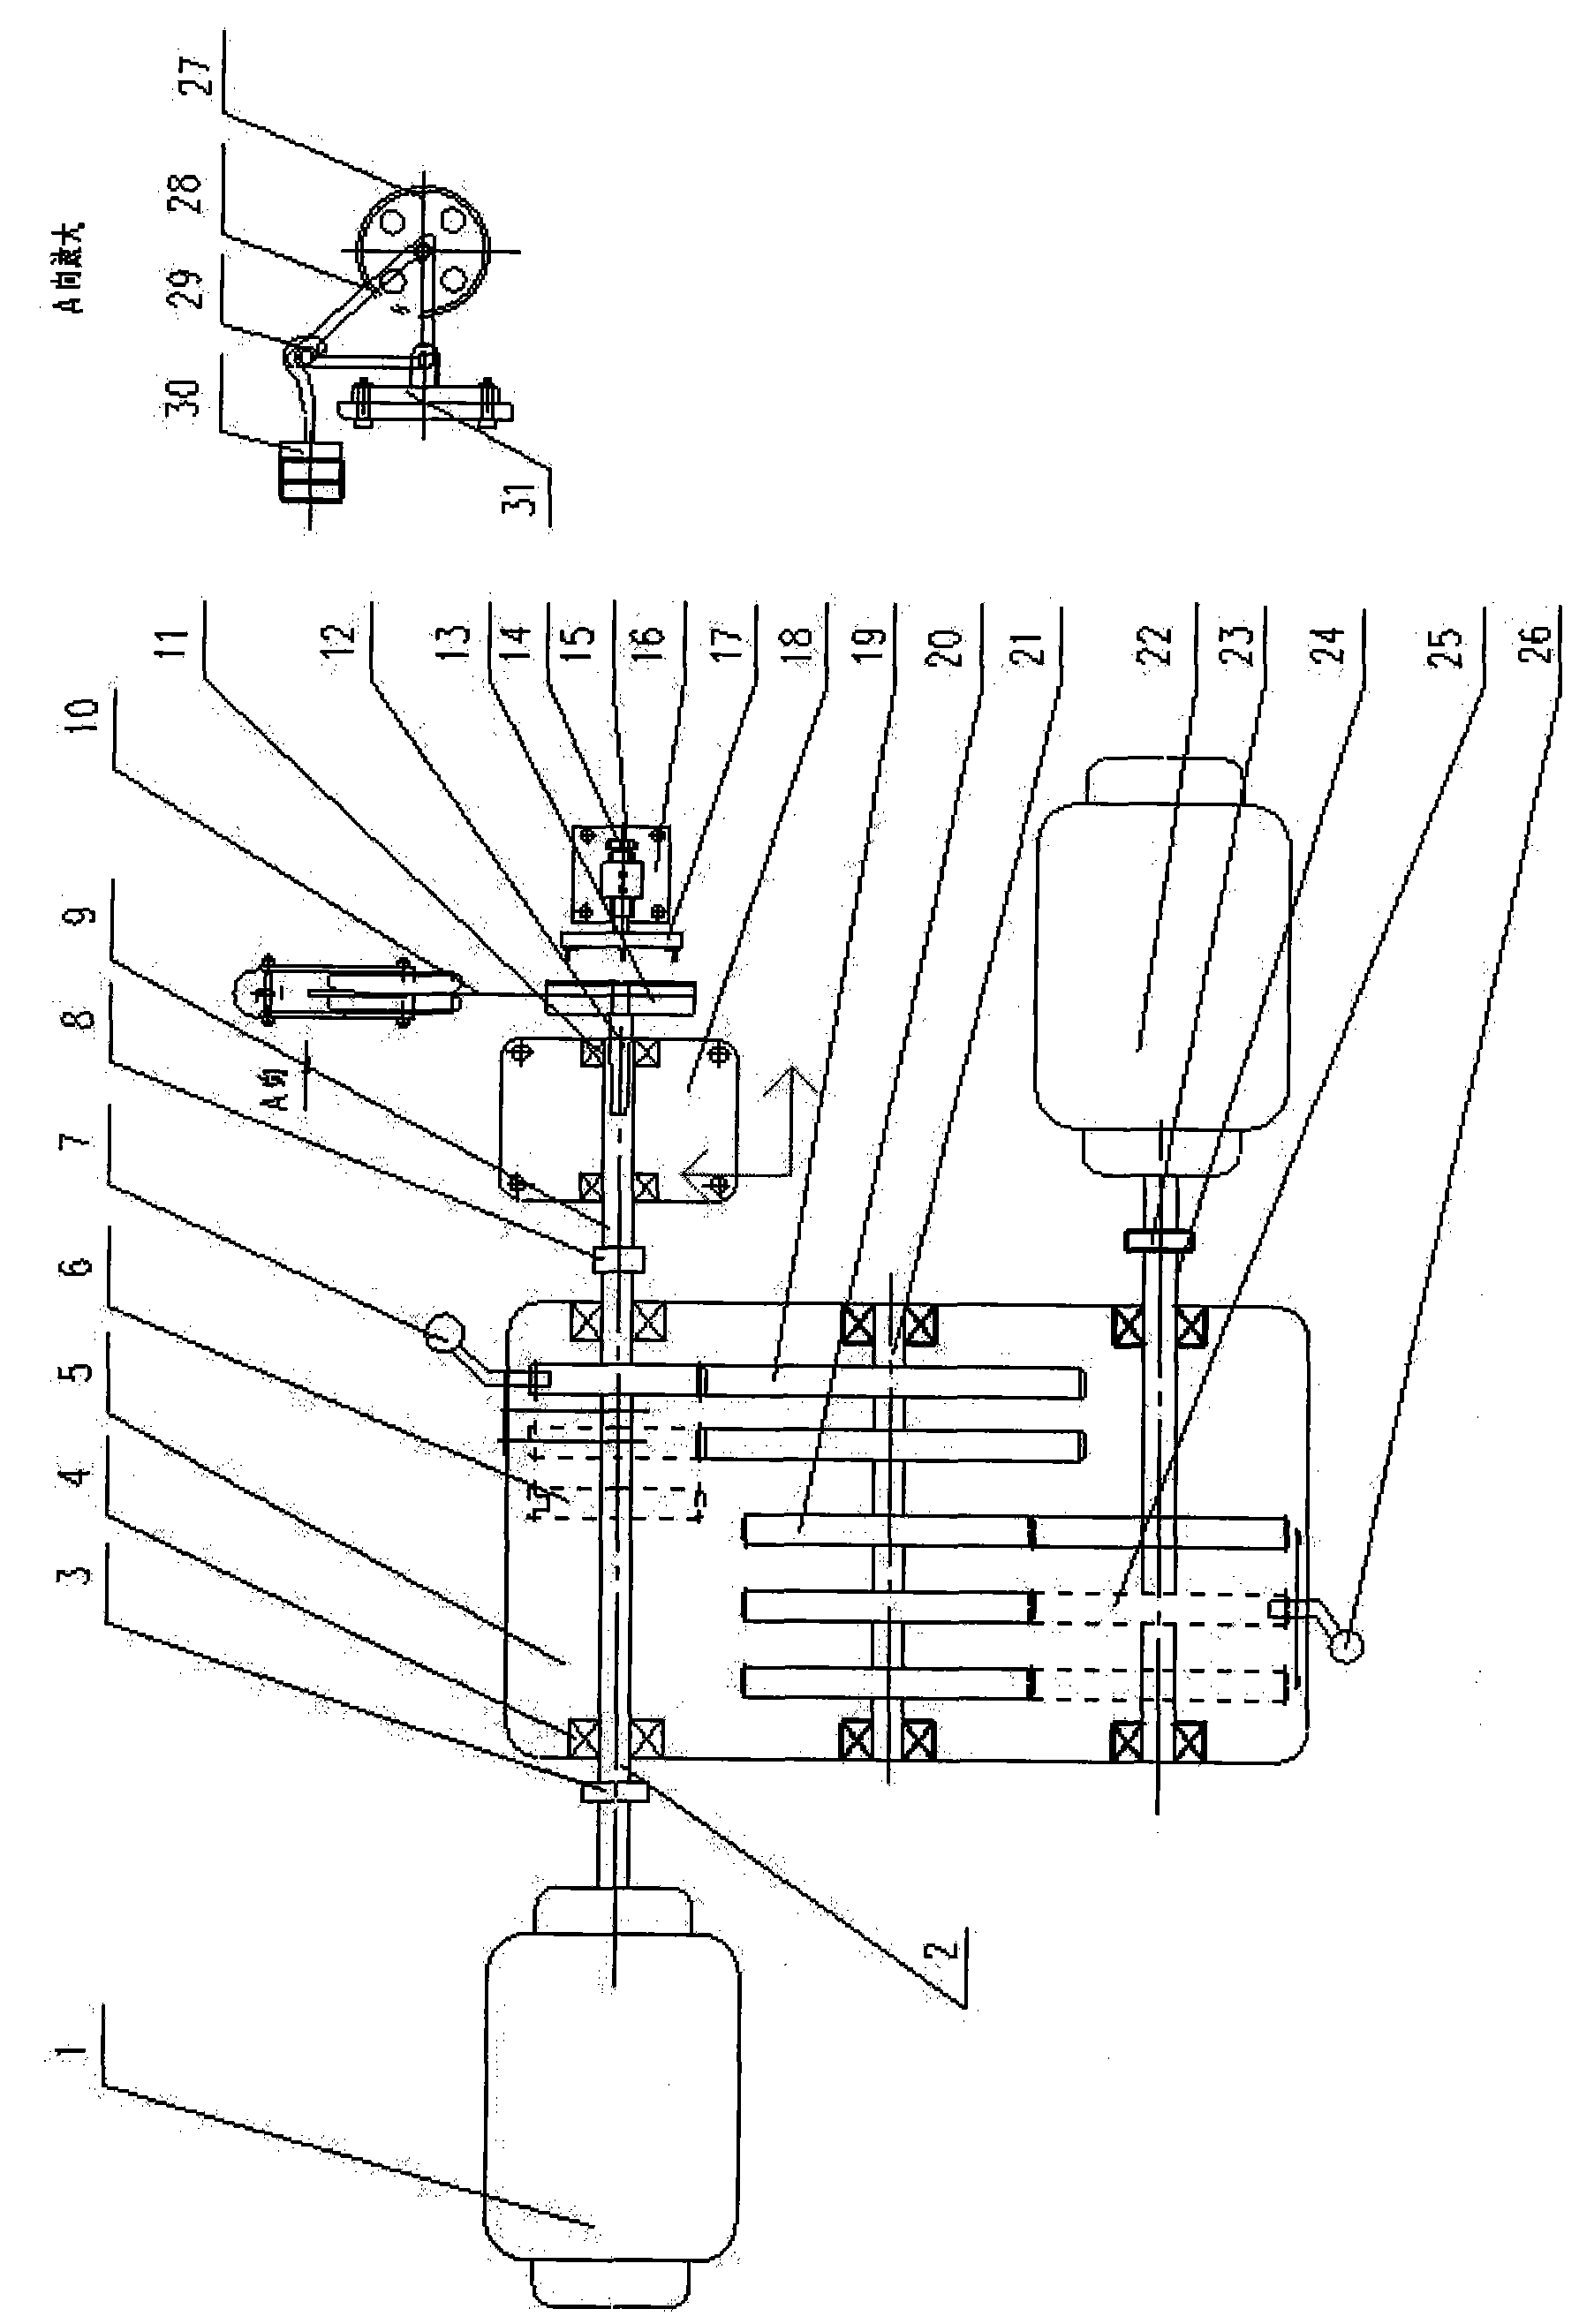 Bearing-gear multi-fault coupled simulation experiment table